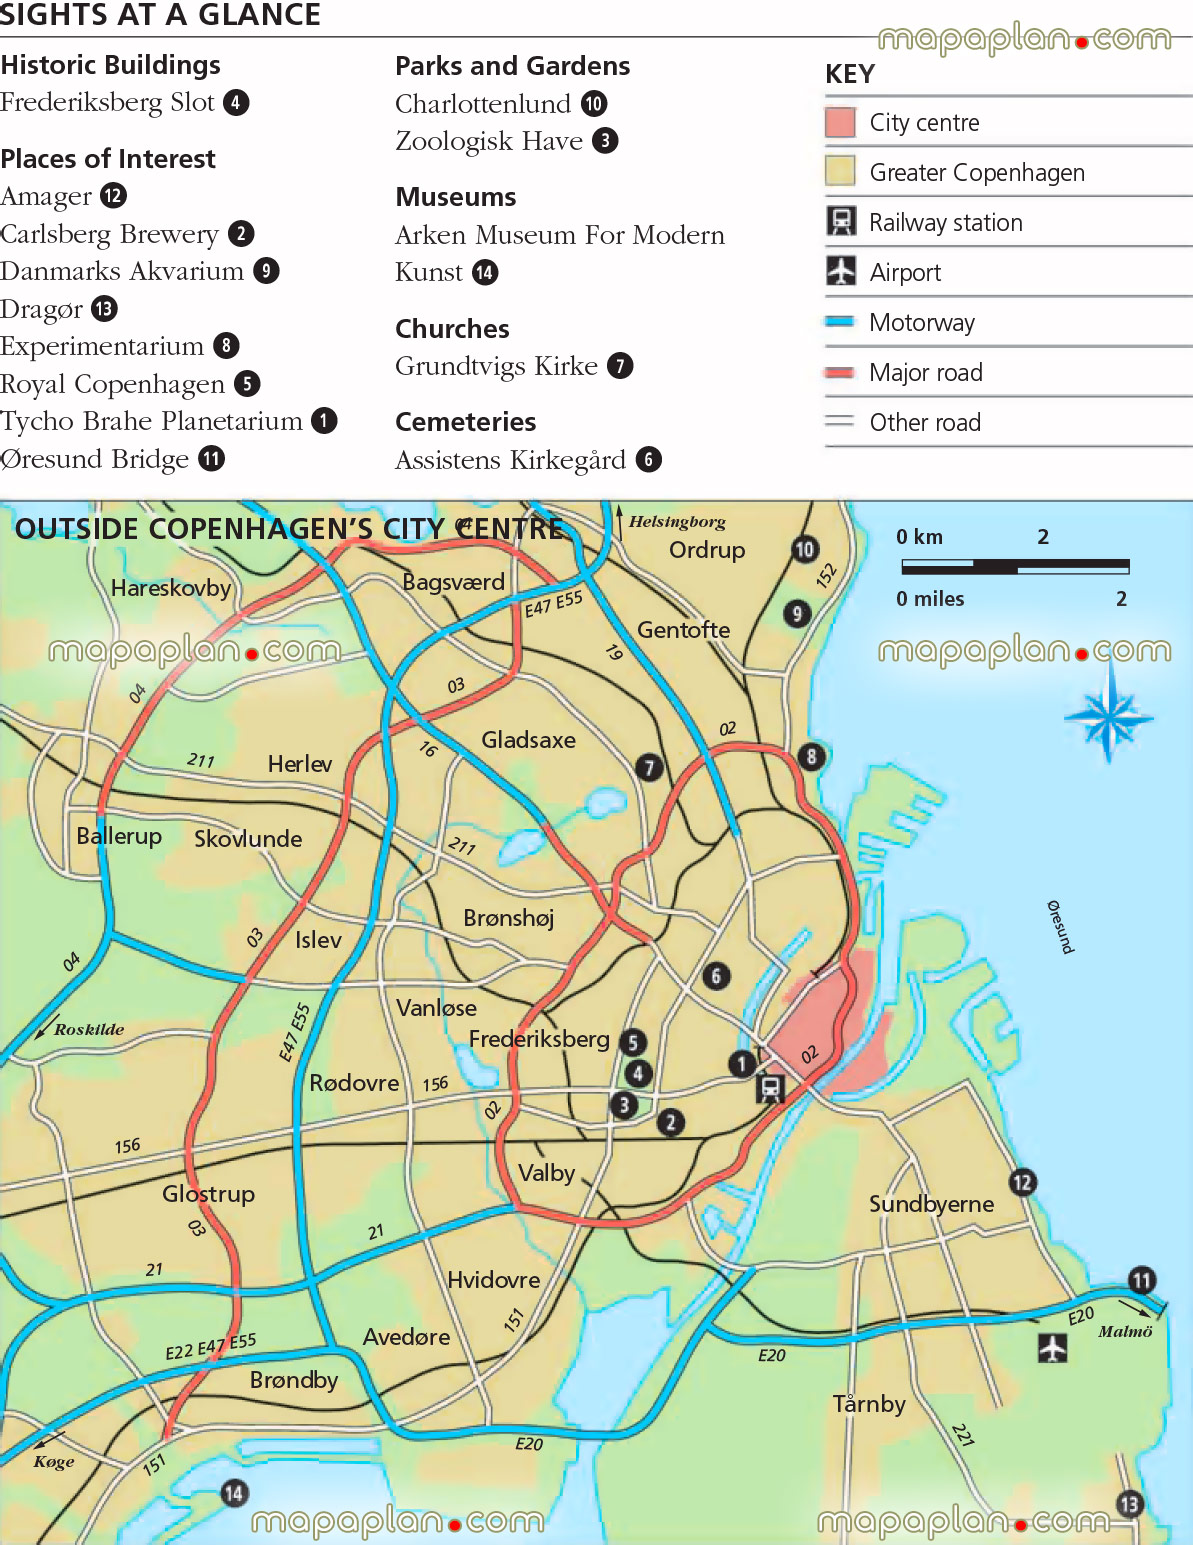 greater copenhagen metropolitan area free download printable detailed guide surrounding area attractions road airport cities main districts neighbourhoodss Copenhagen Top tourist attractions map